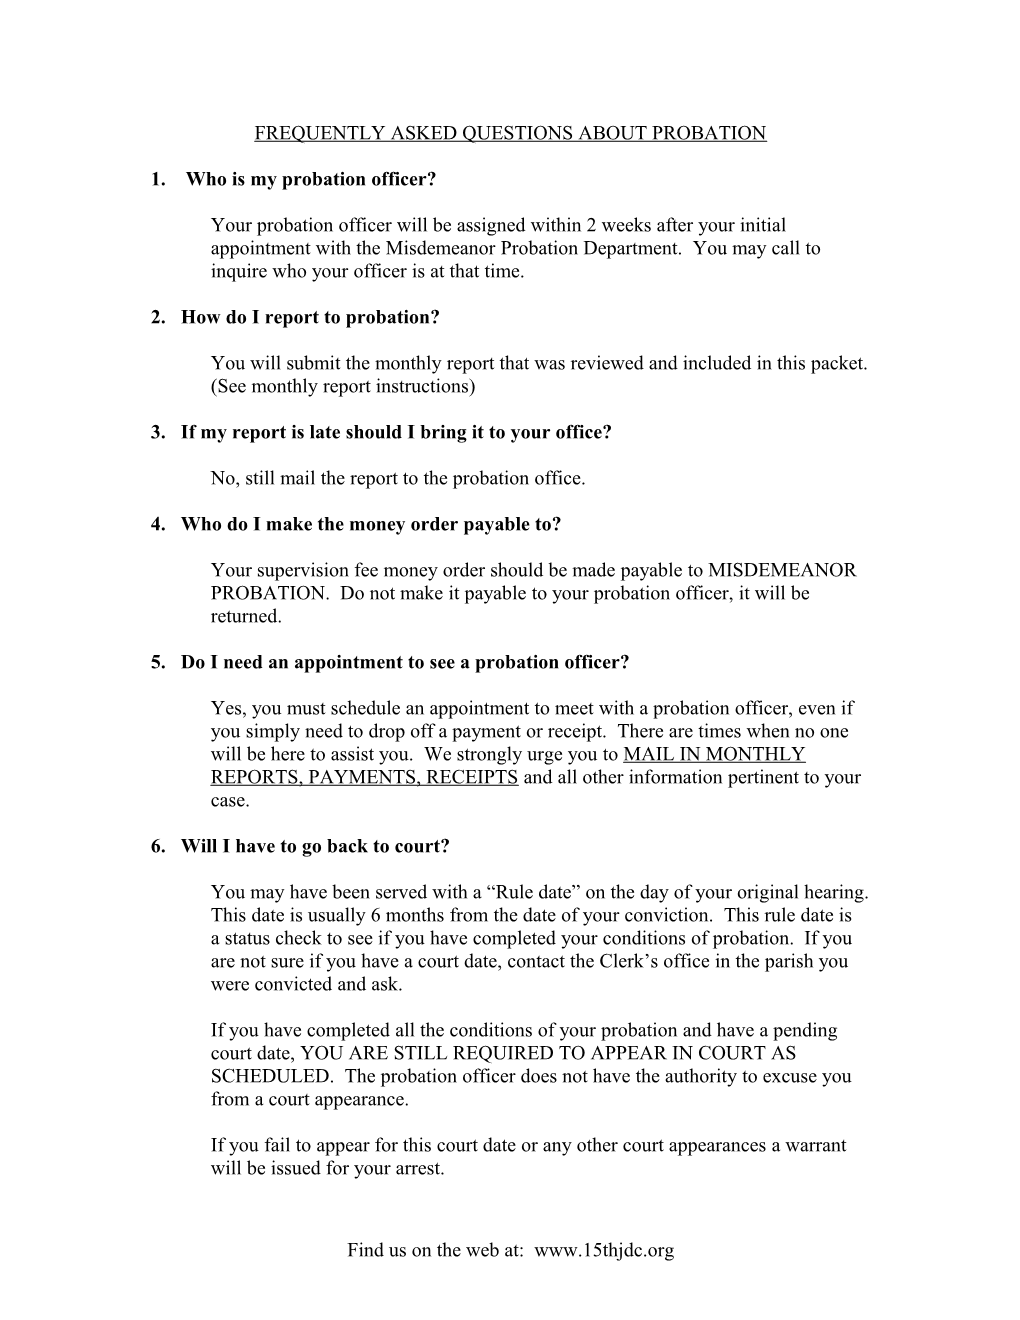 Frequently Asked Questions About Probation